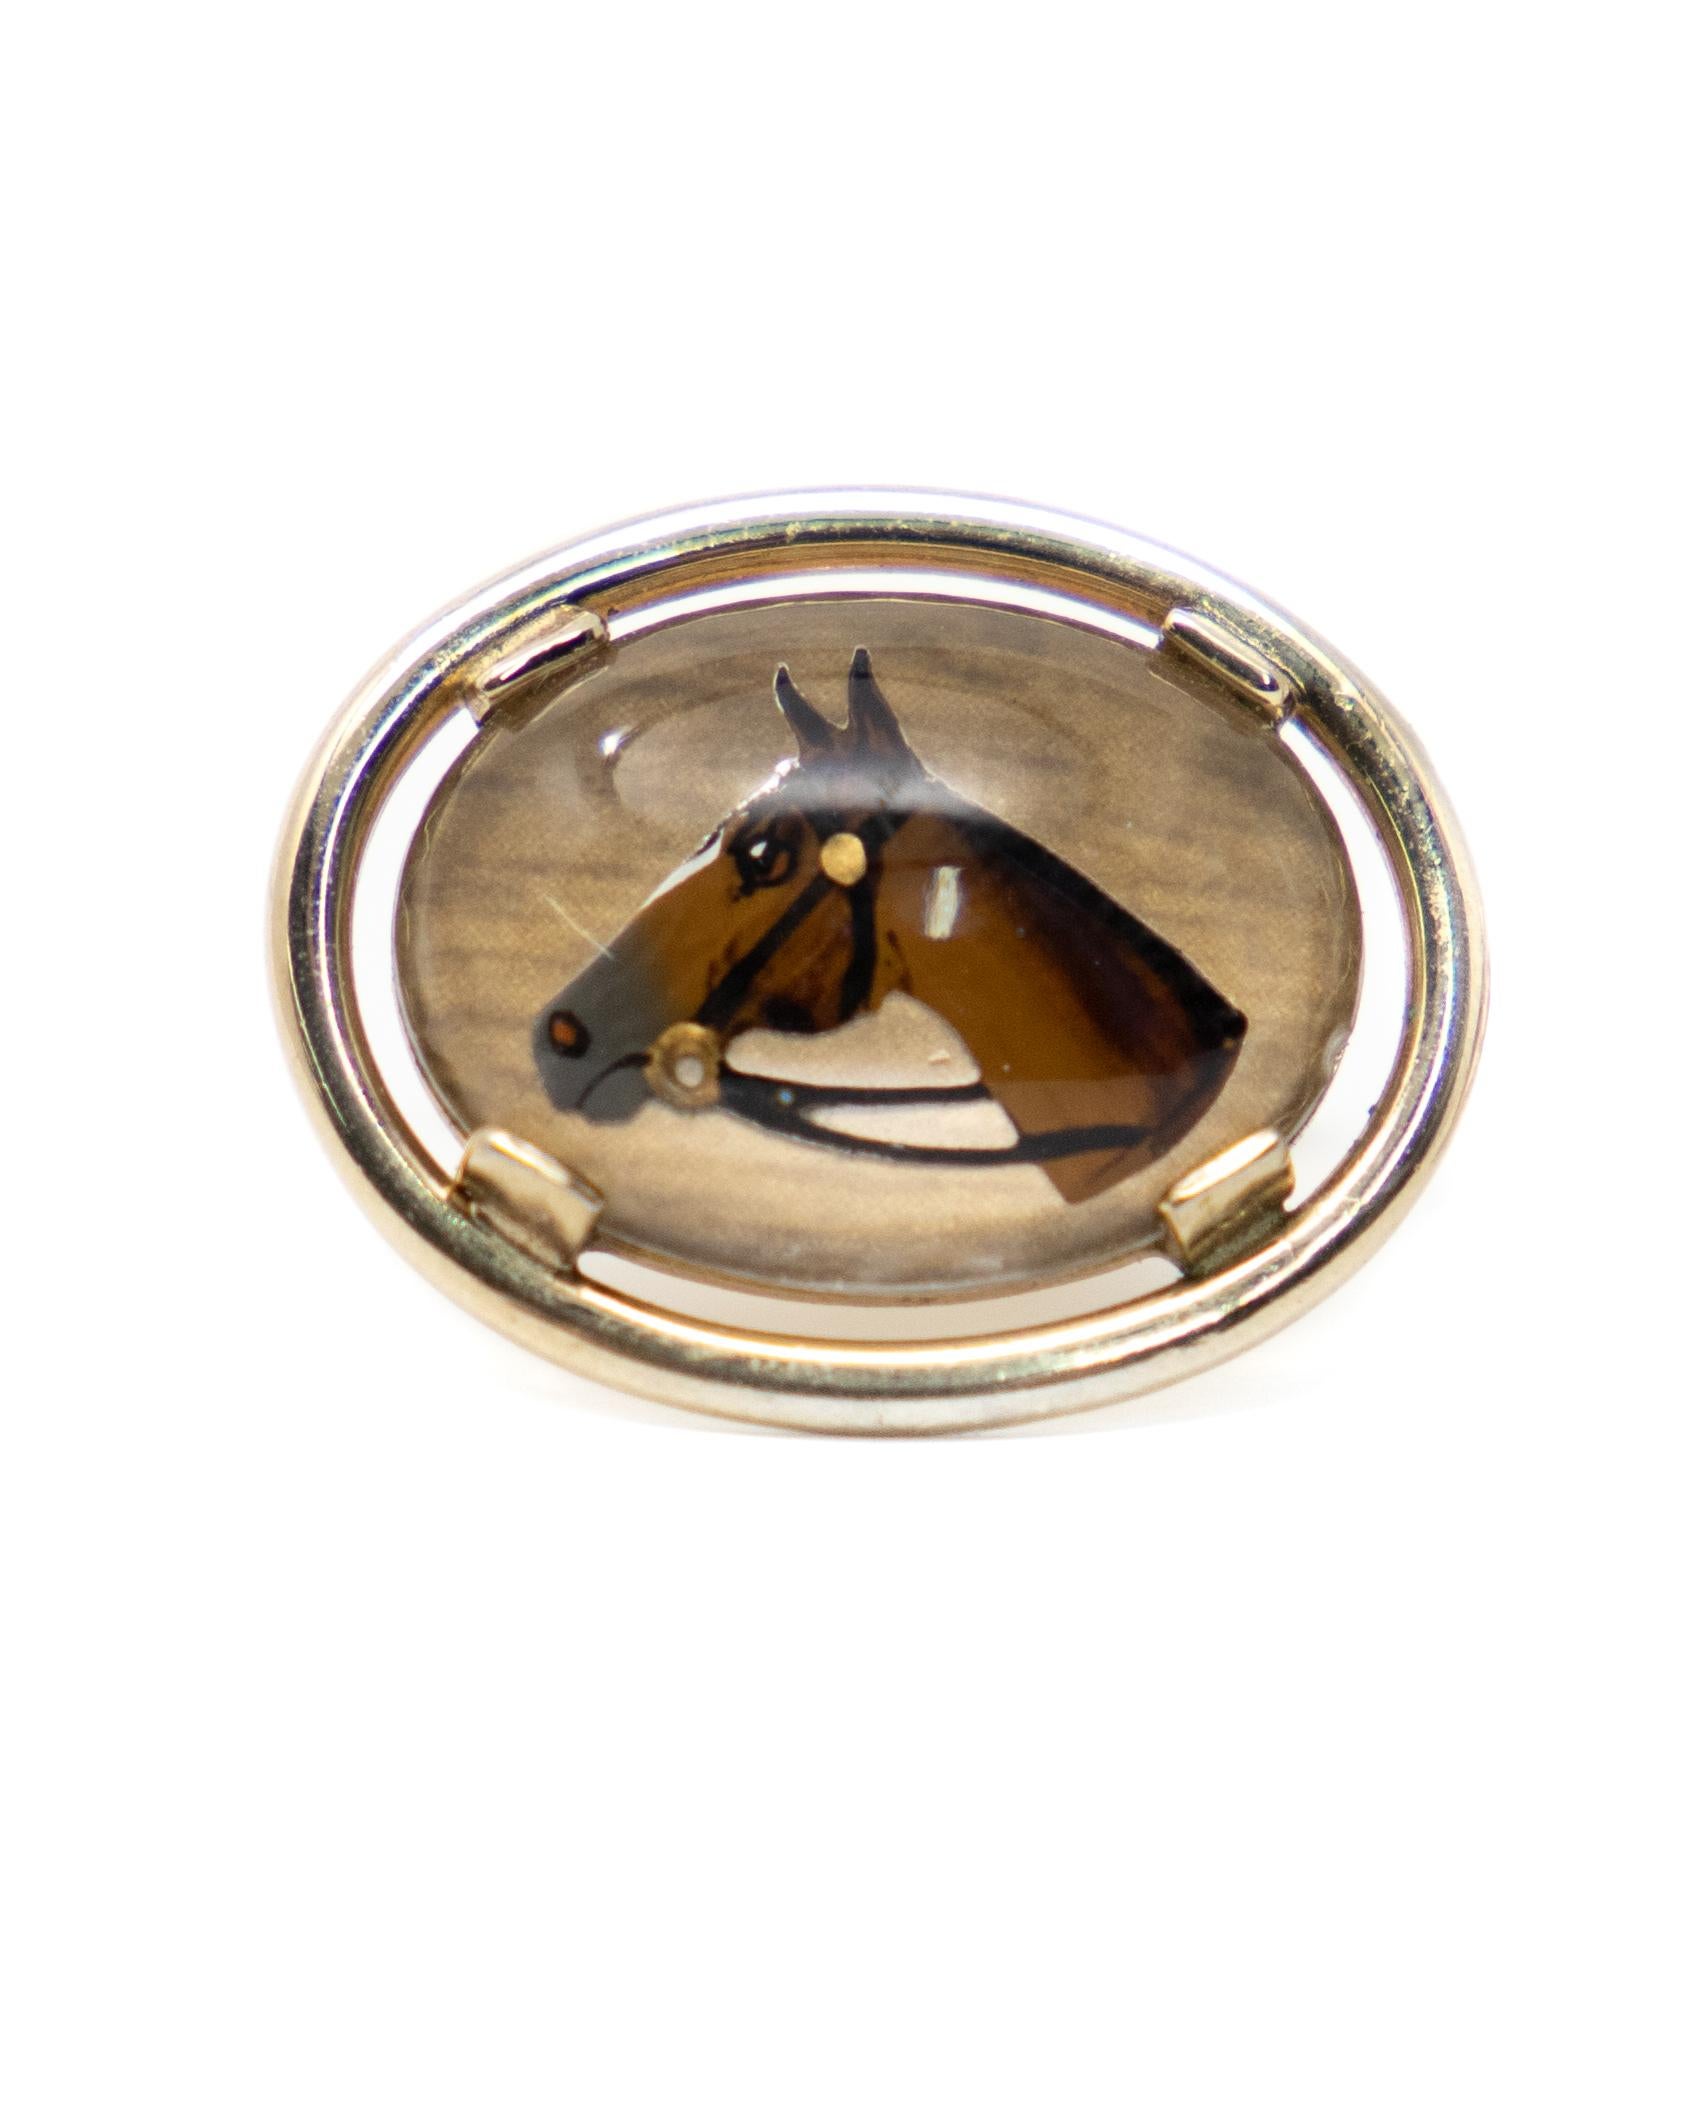 Offering a cool pair of horse head cufflinks by Swank. Gold toned metal with the enameled painting under acrylic.